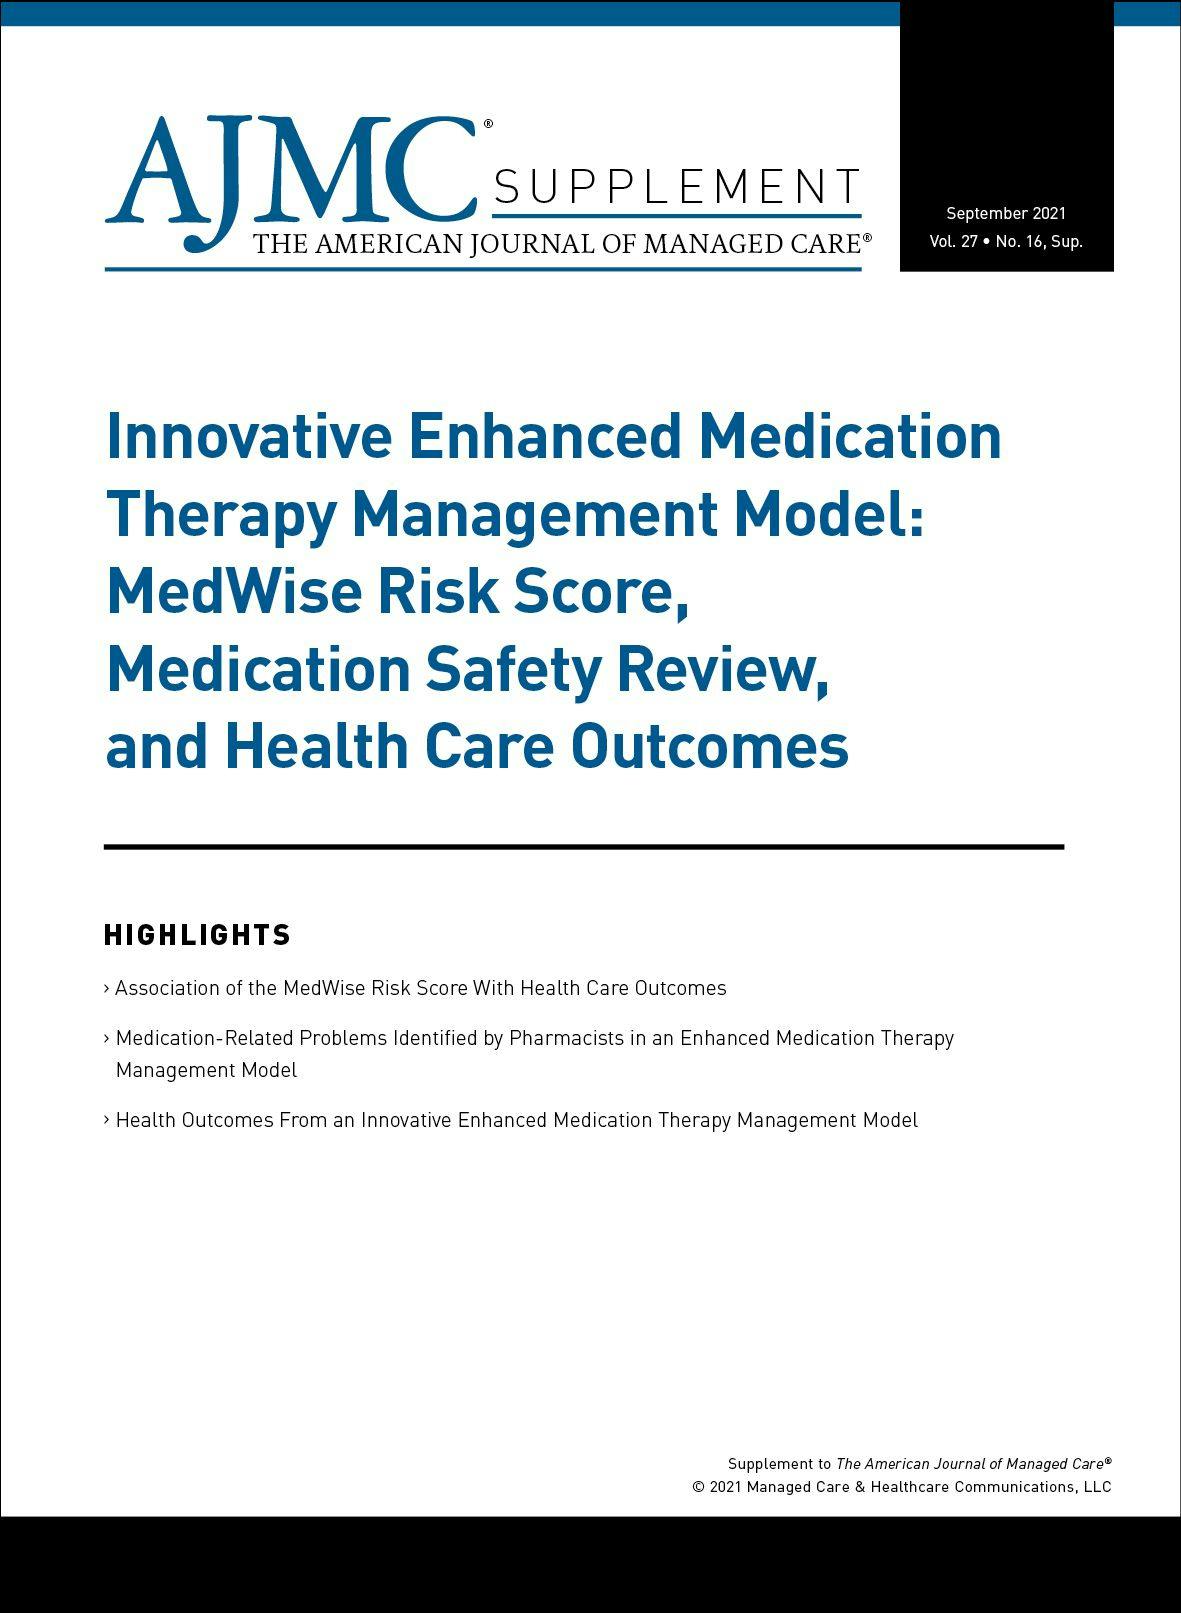 Innovative Enhanced Medication Therapy Management Model: MedWise Risk Score, Medication Safety Review, and Health Care Outcomes